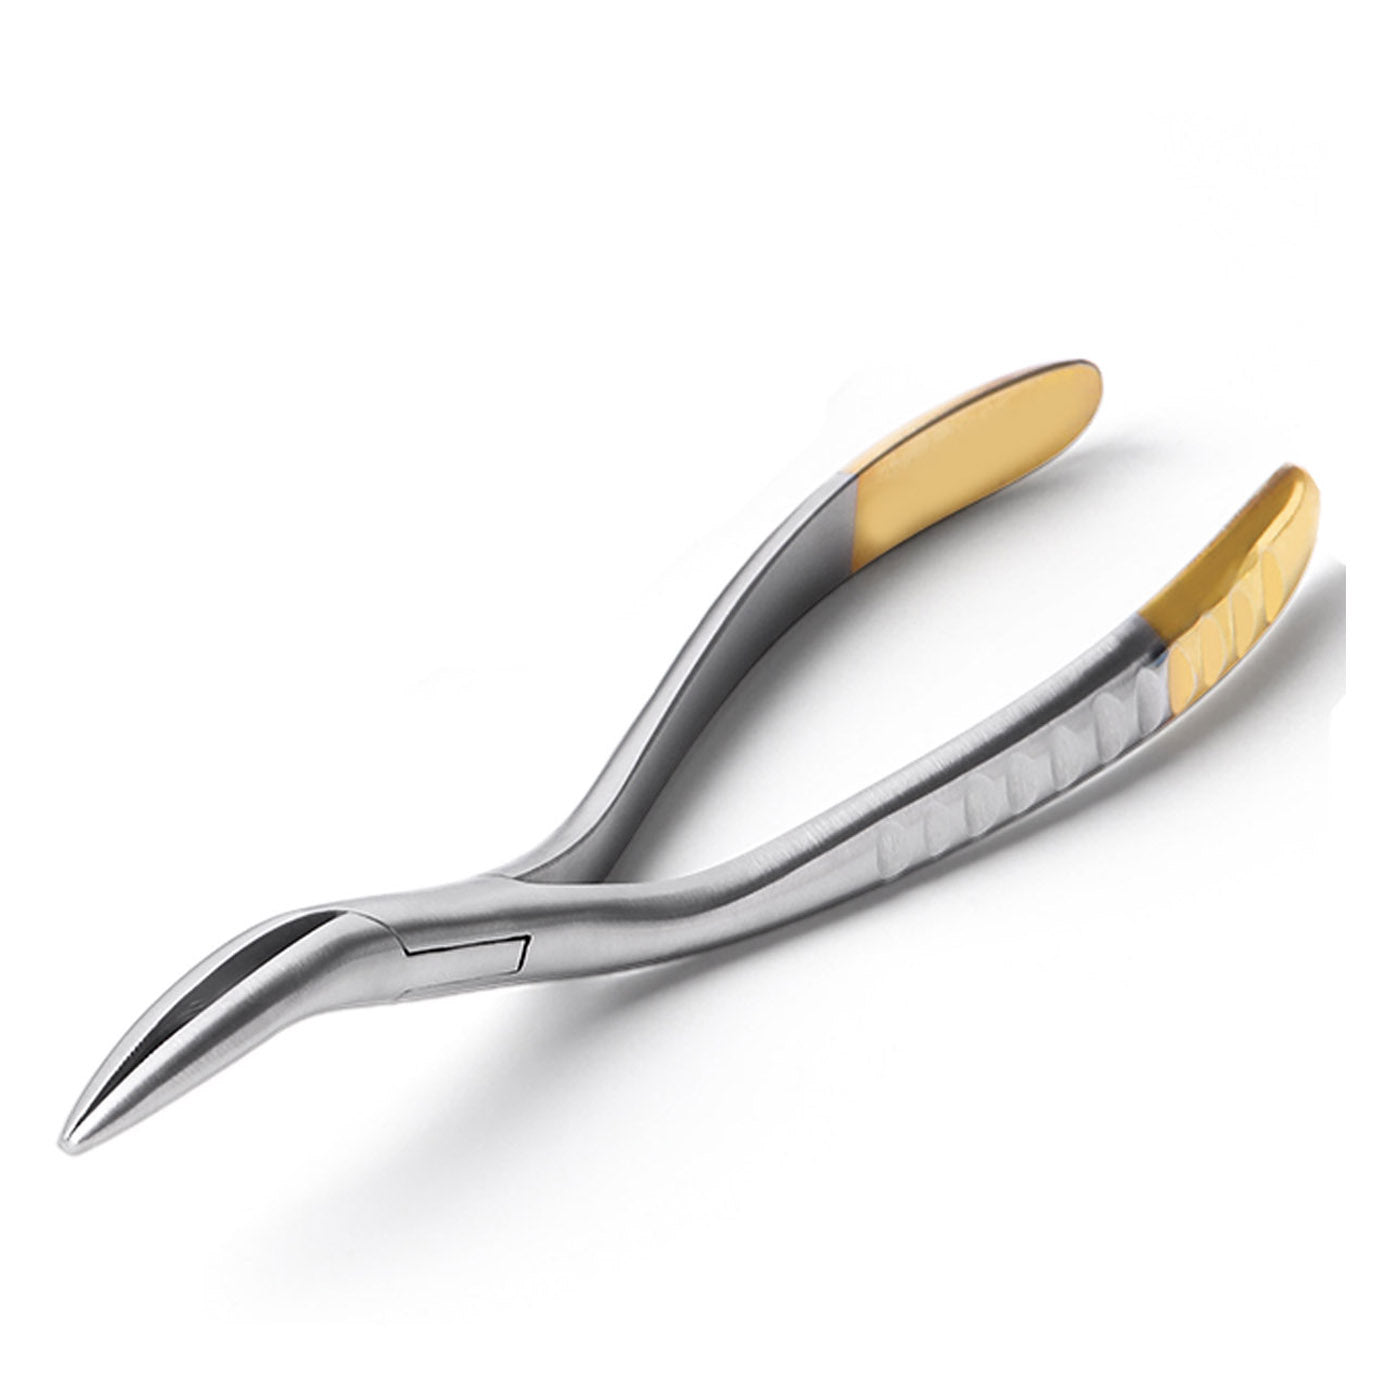 Dental Root Fragment Minimally Invasive Tooth Extraction Forceps Pliers #3 Upper & Lower Teeth  - pairaydental.com